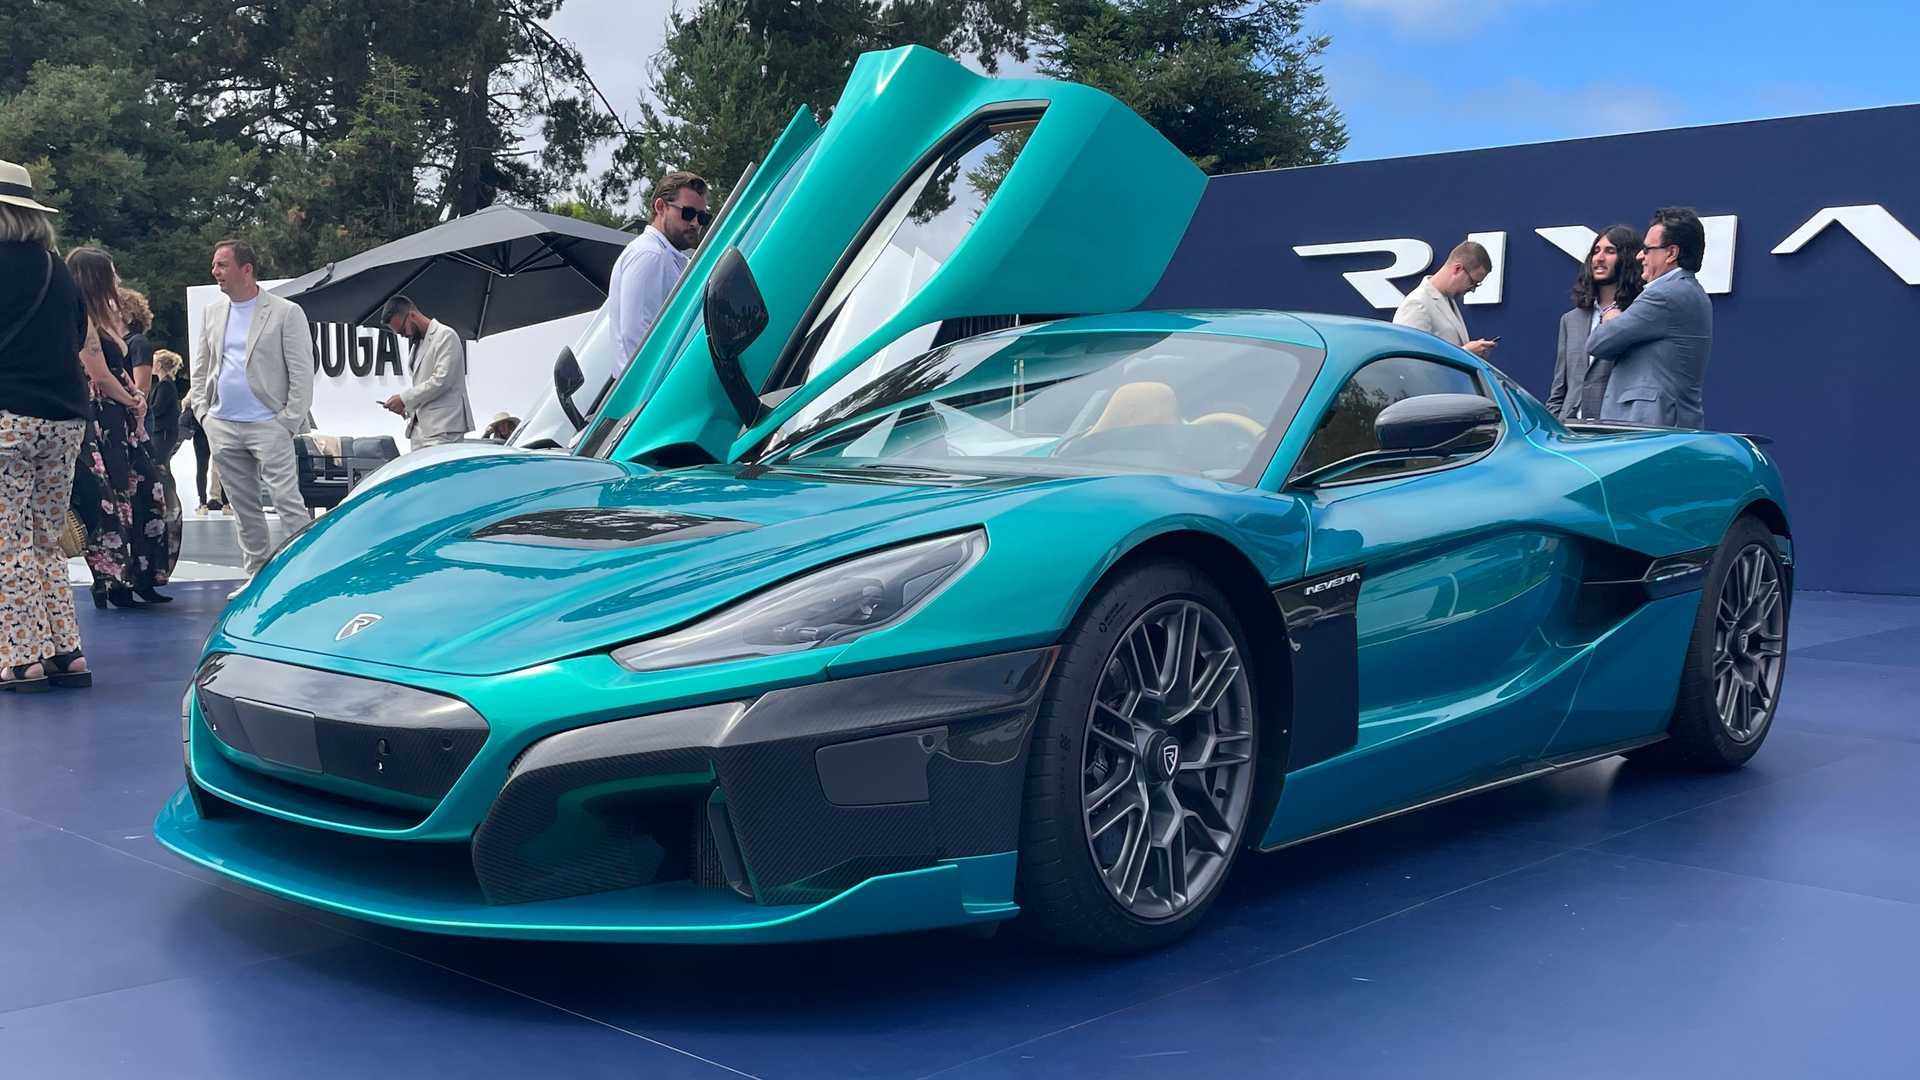 This Easter Egg On The Rimac Nevera Ties Aerodynamics And Fashion Together